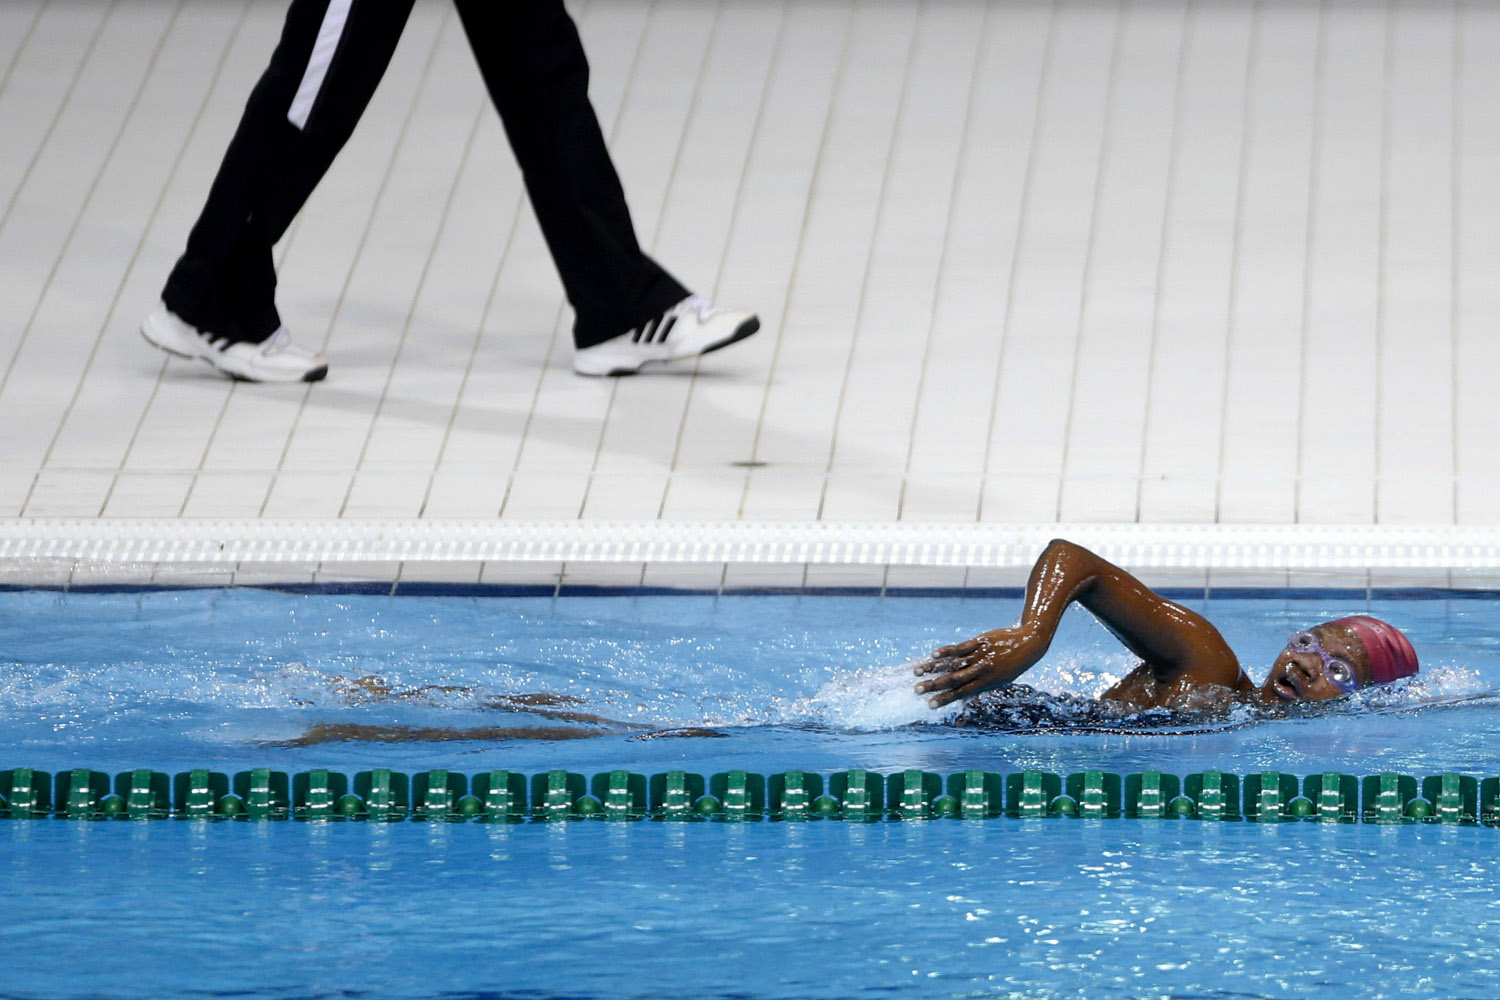 July 18, 2012. Congo's Aminata Aboubakar Yacoub, right, trains with her coach Albert Bobongo for the 2012 Summer Olympics at the Aquatics Center at the Olympic Park, in London.